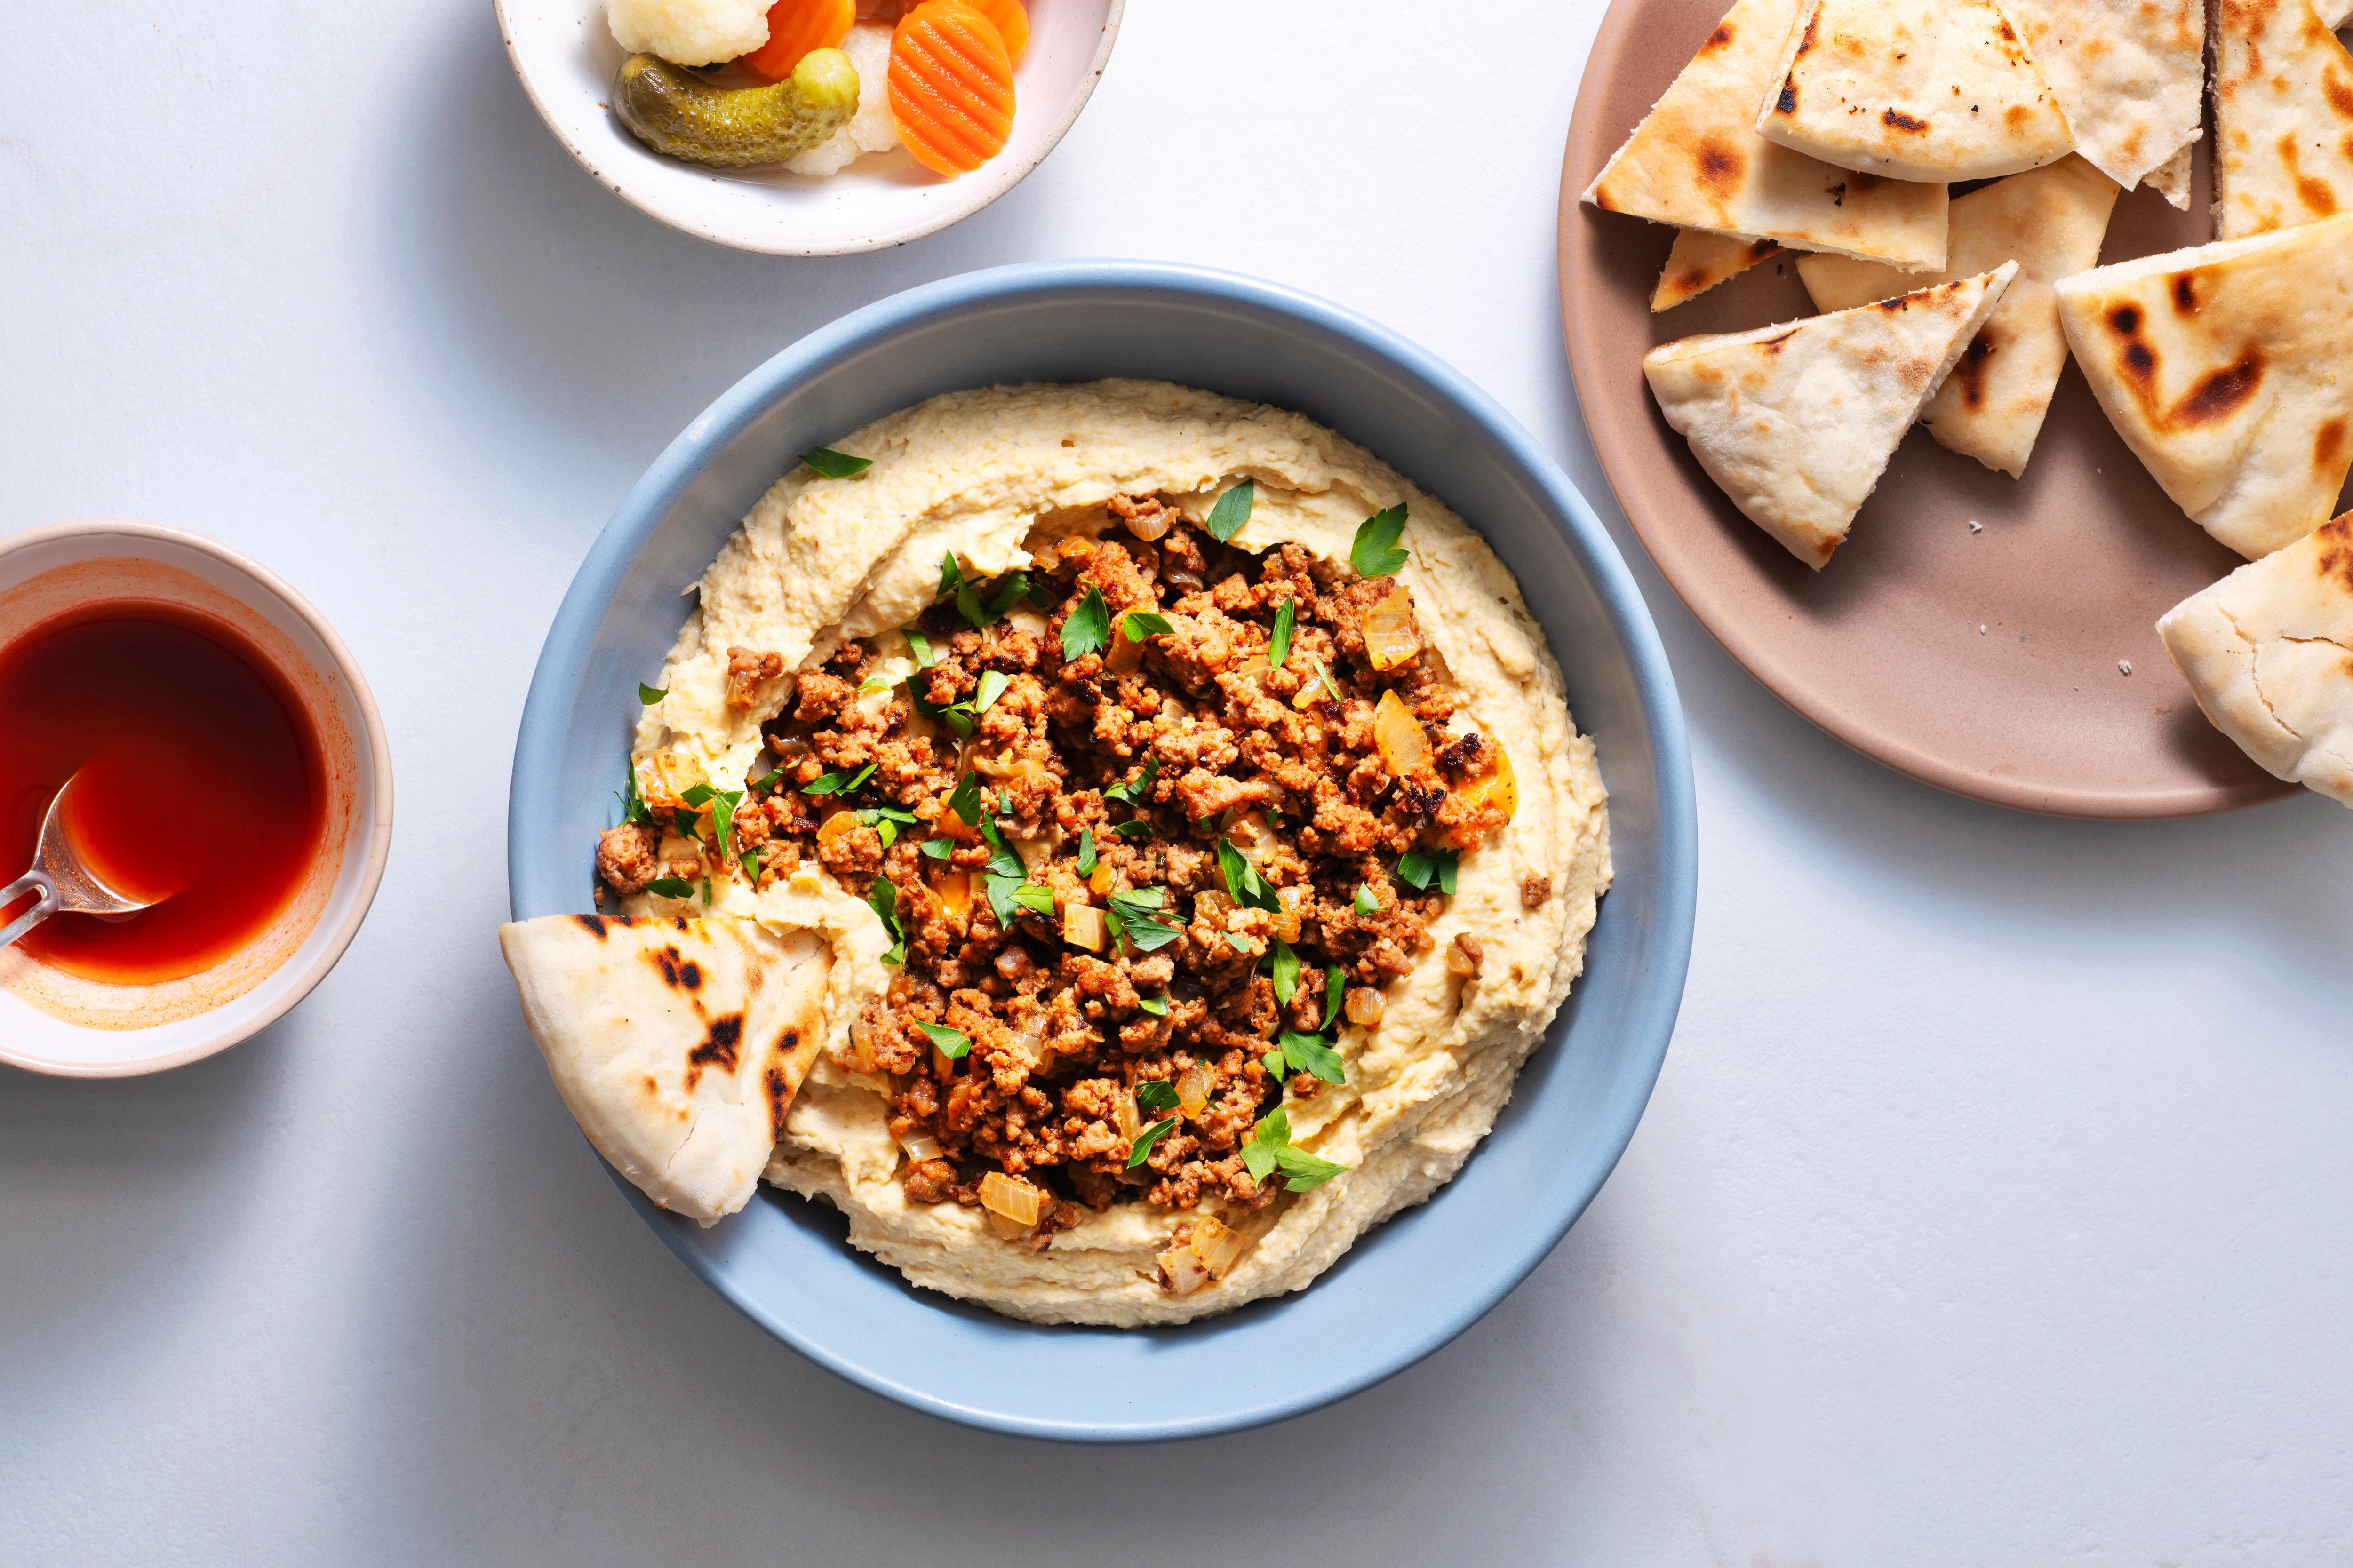 Spiced Beef Over Hummus